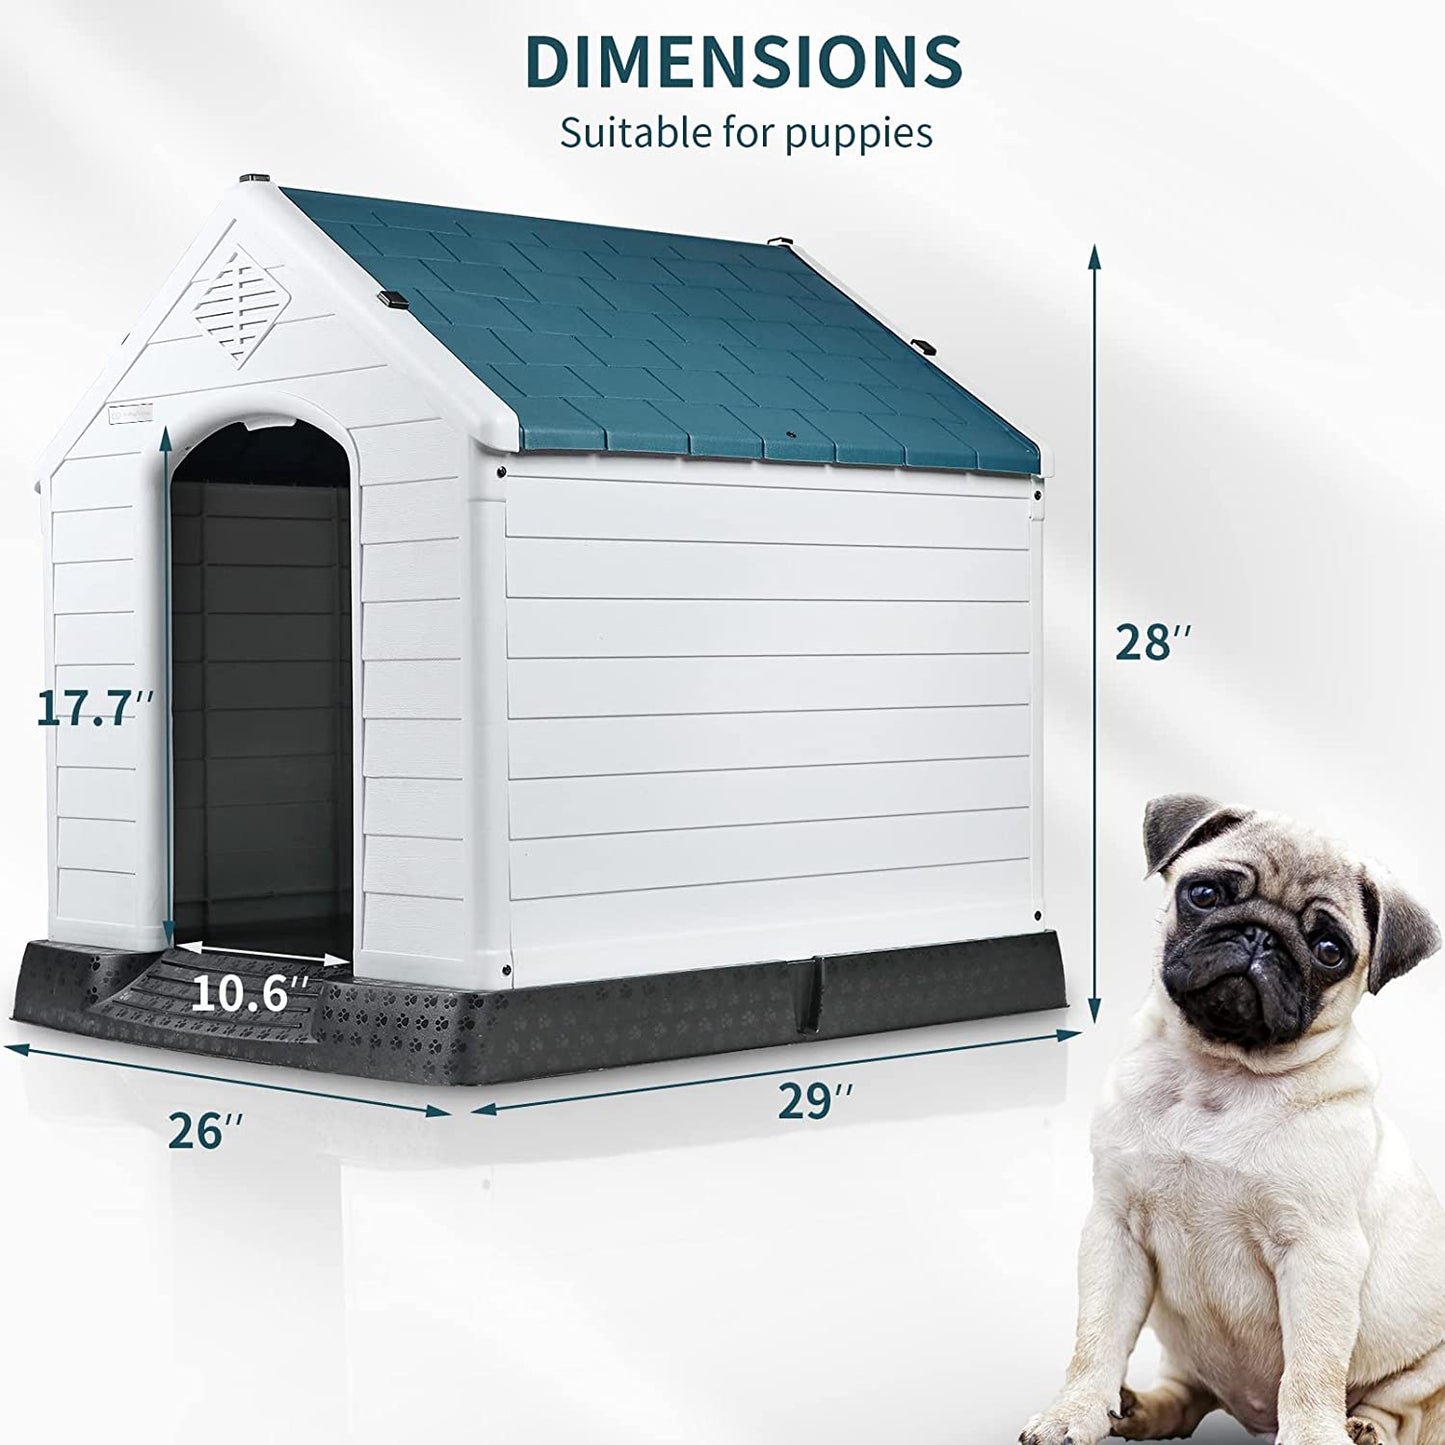 Waleaf Plastic Dog House Outdoor Indoor for Small Medium Larige Dogs,Waterproof Dog Houses with Elevated Floor and Air Vents,Durable Ventilate & Easy Clean and Assemble